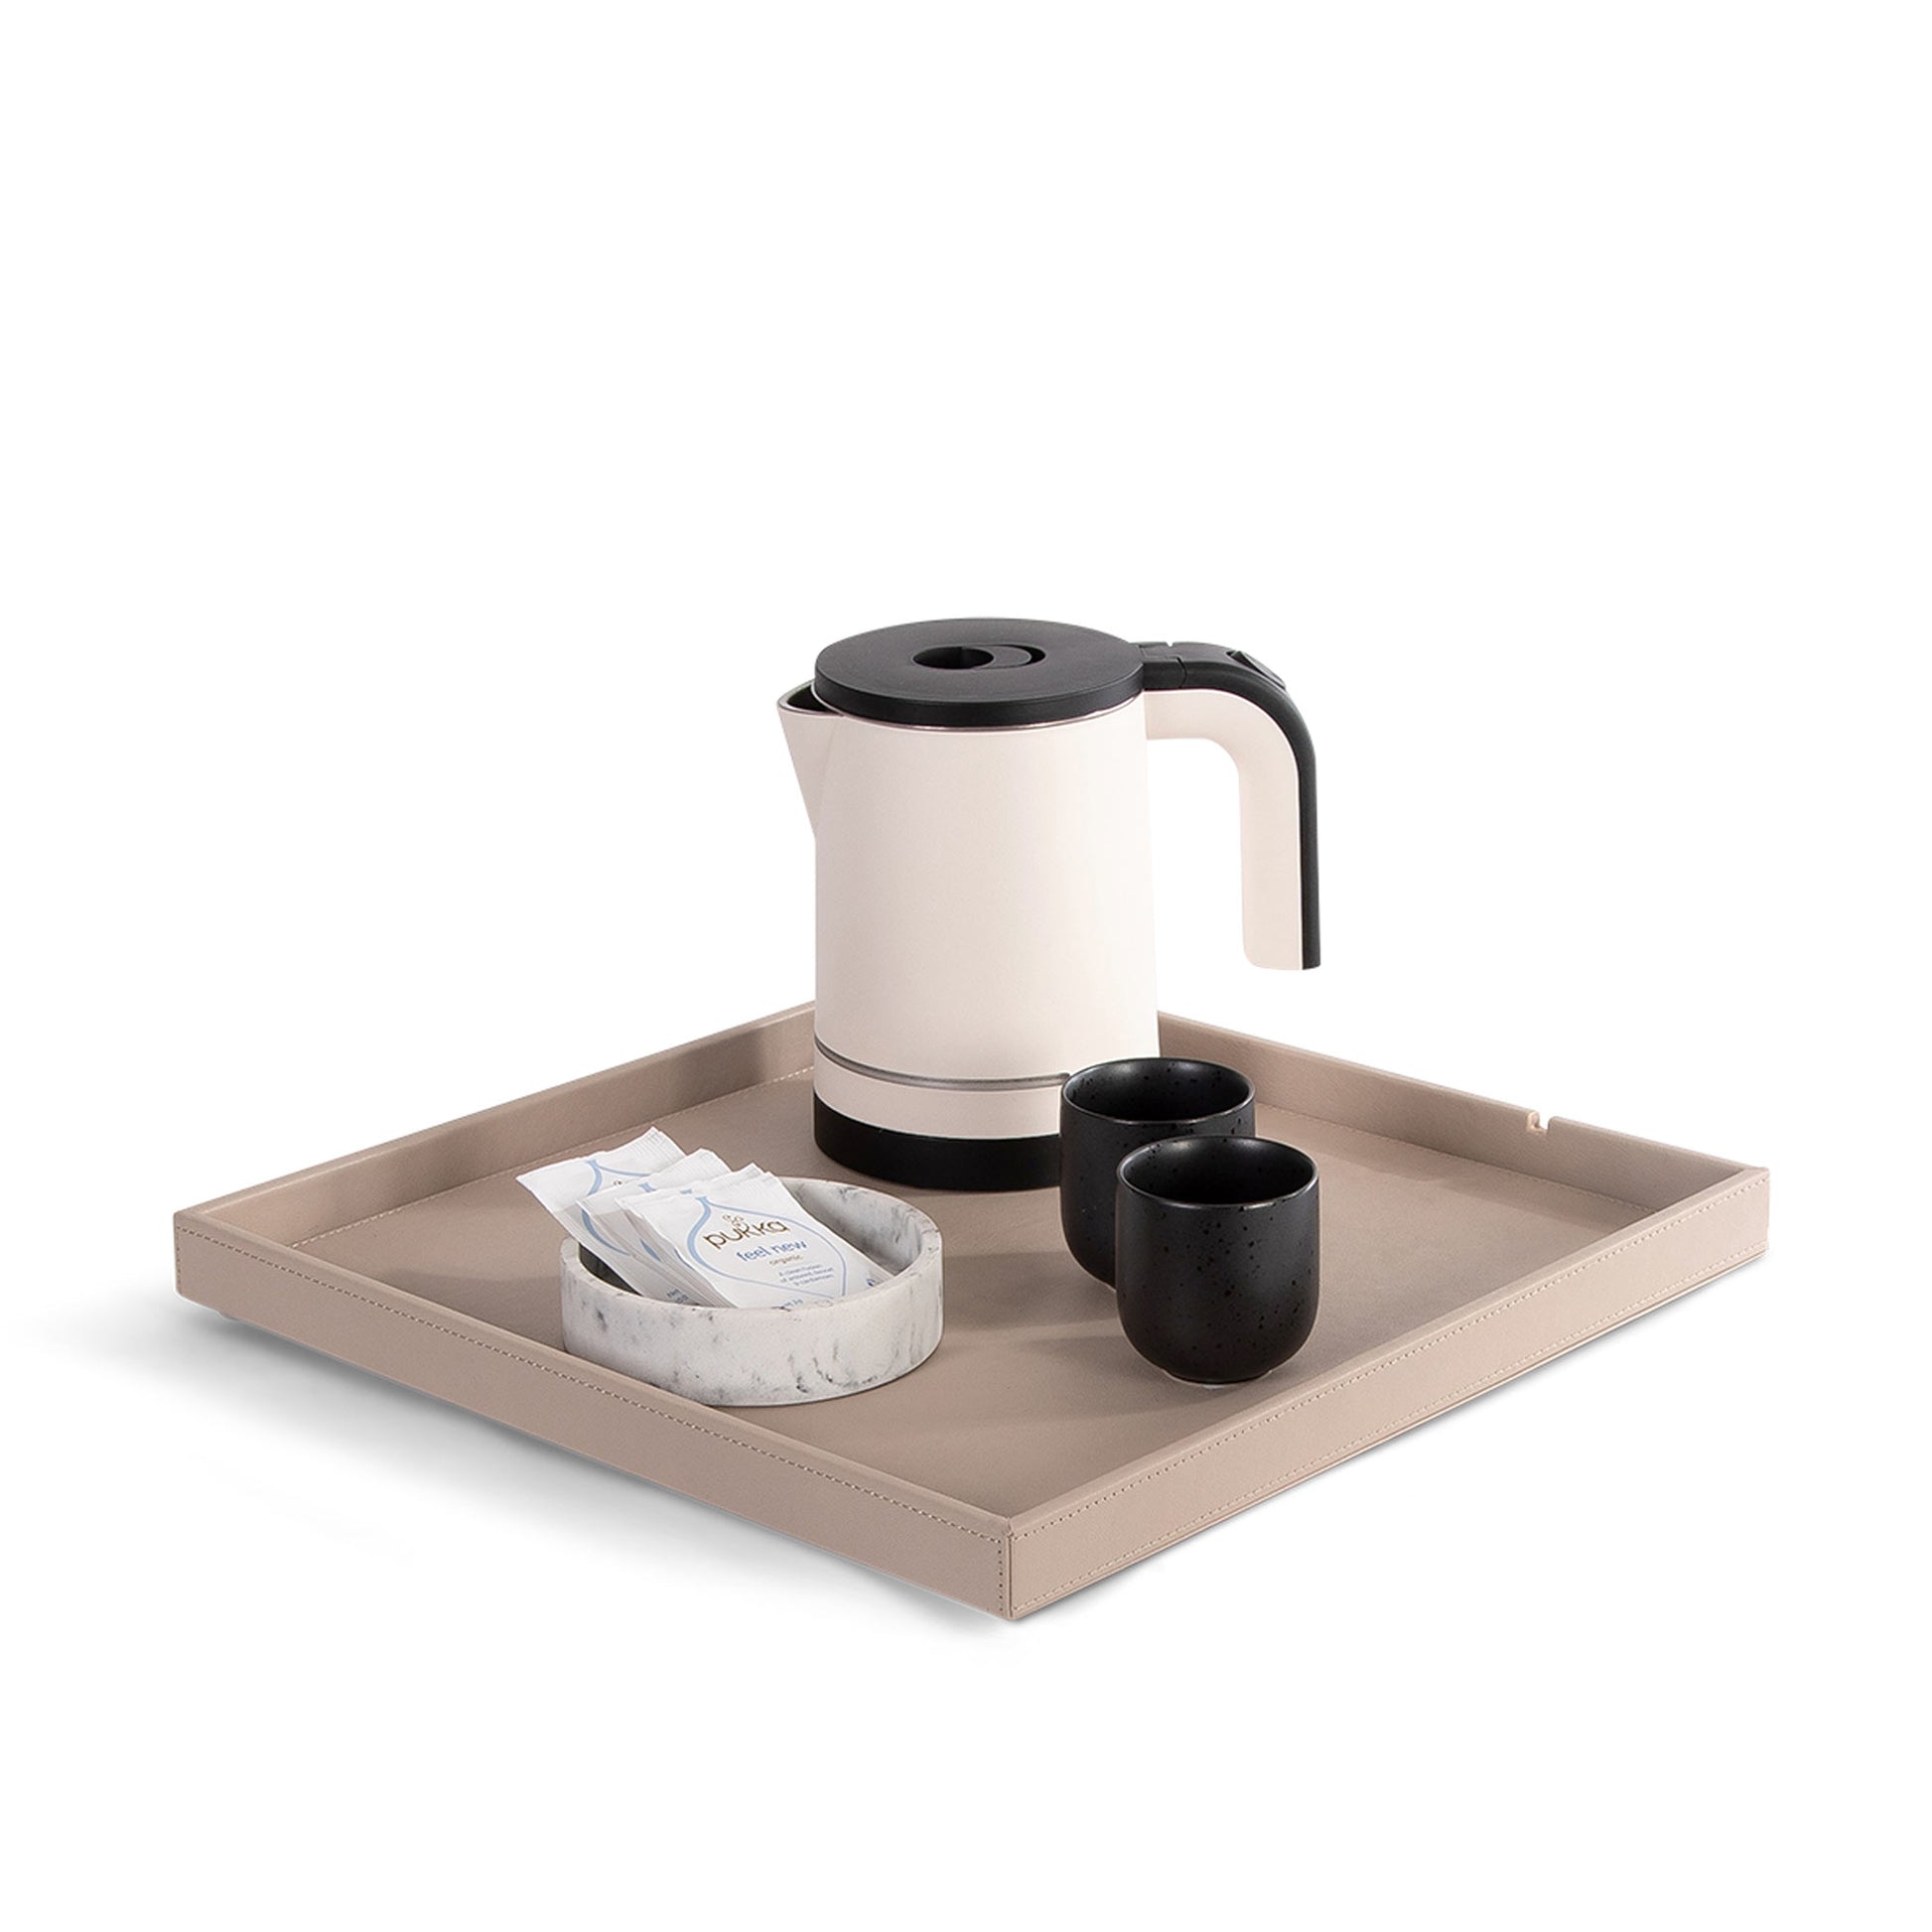 Bentley Fuji kettle tray in natural leather with condiment tray